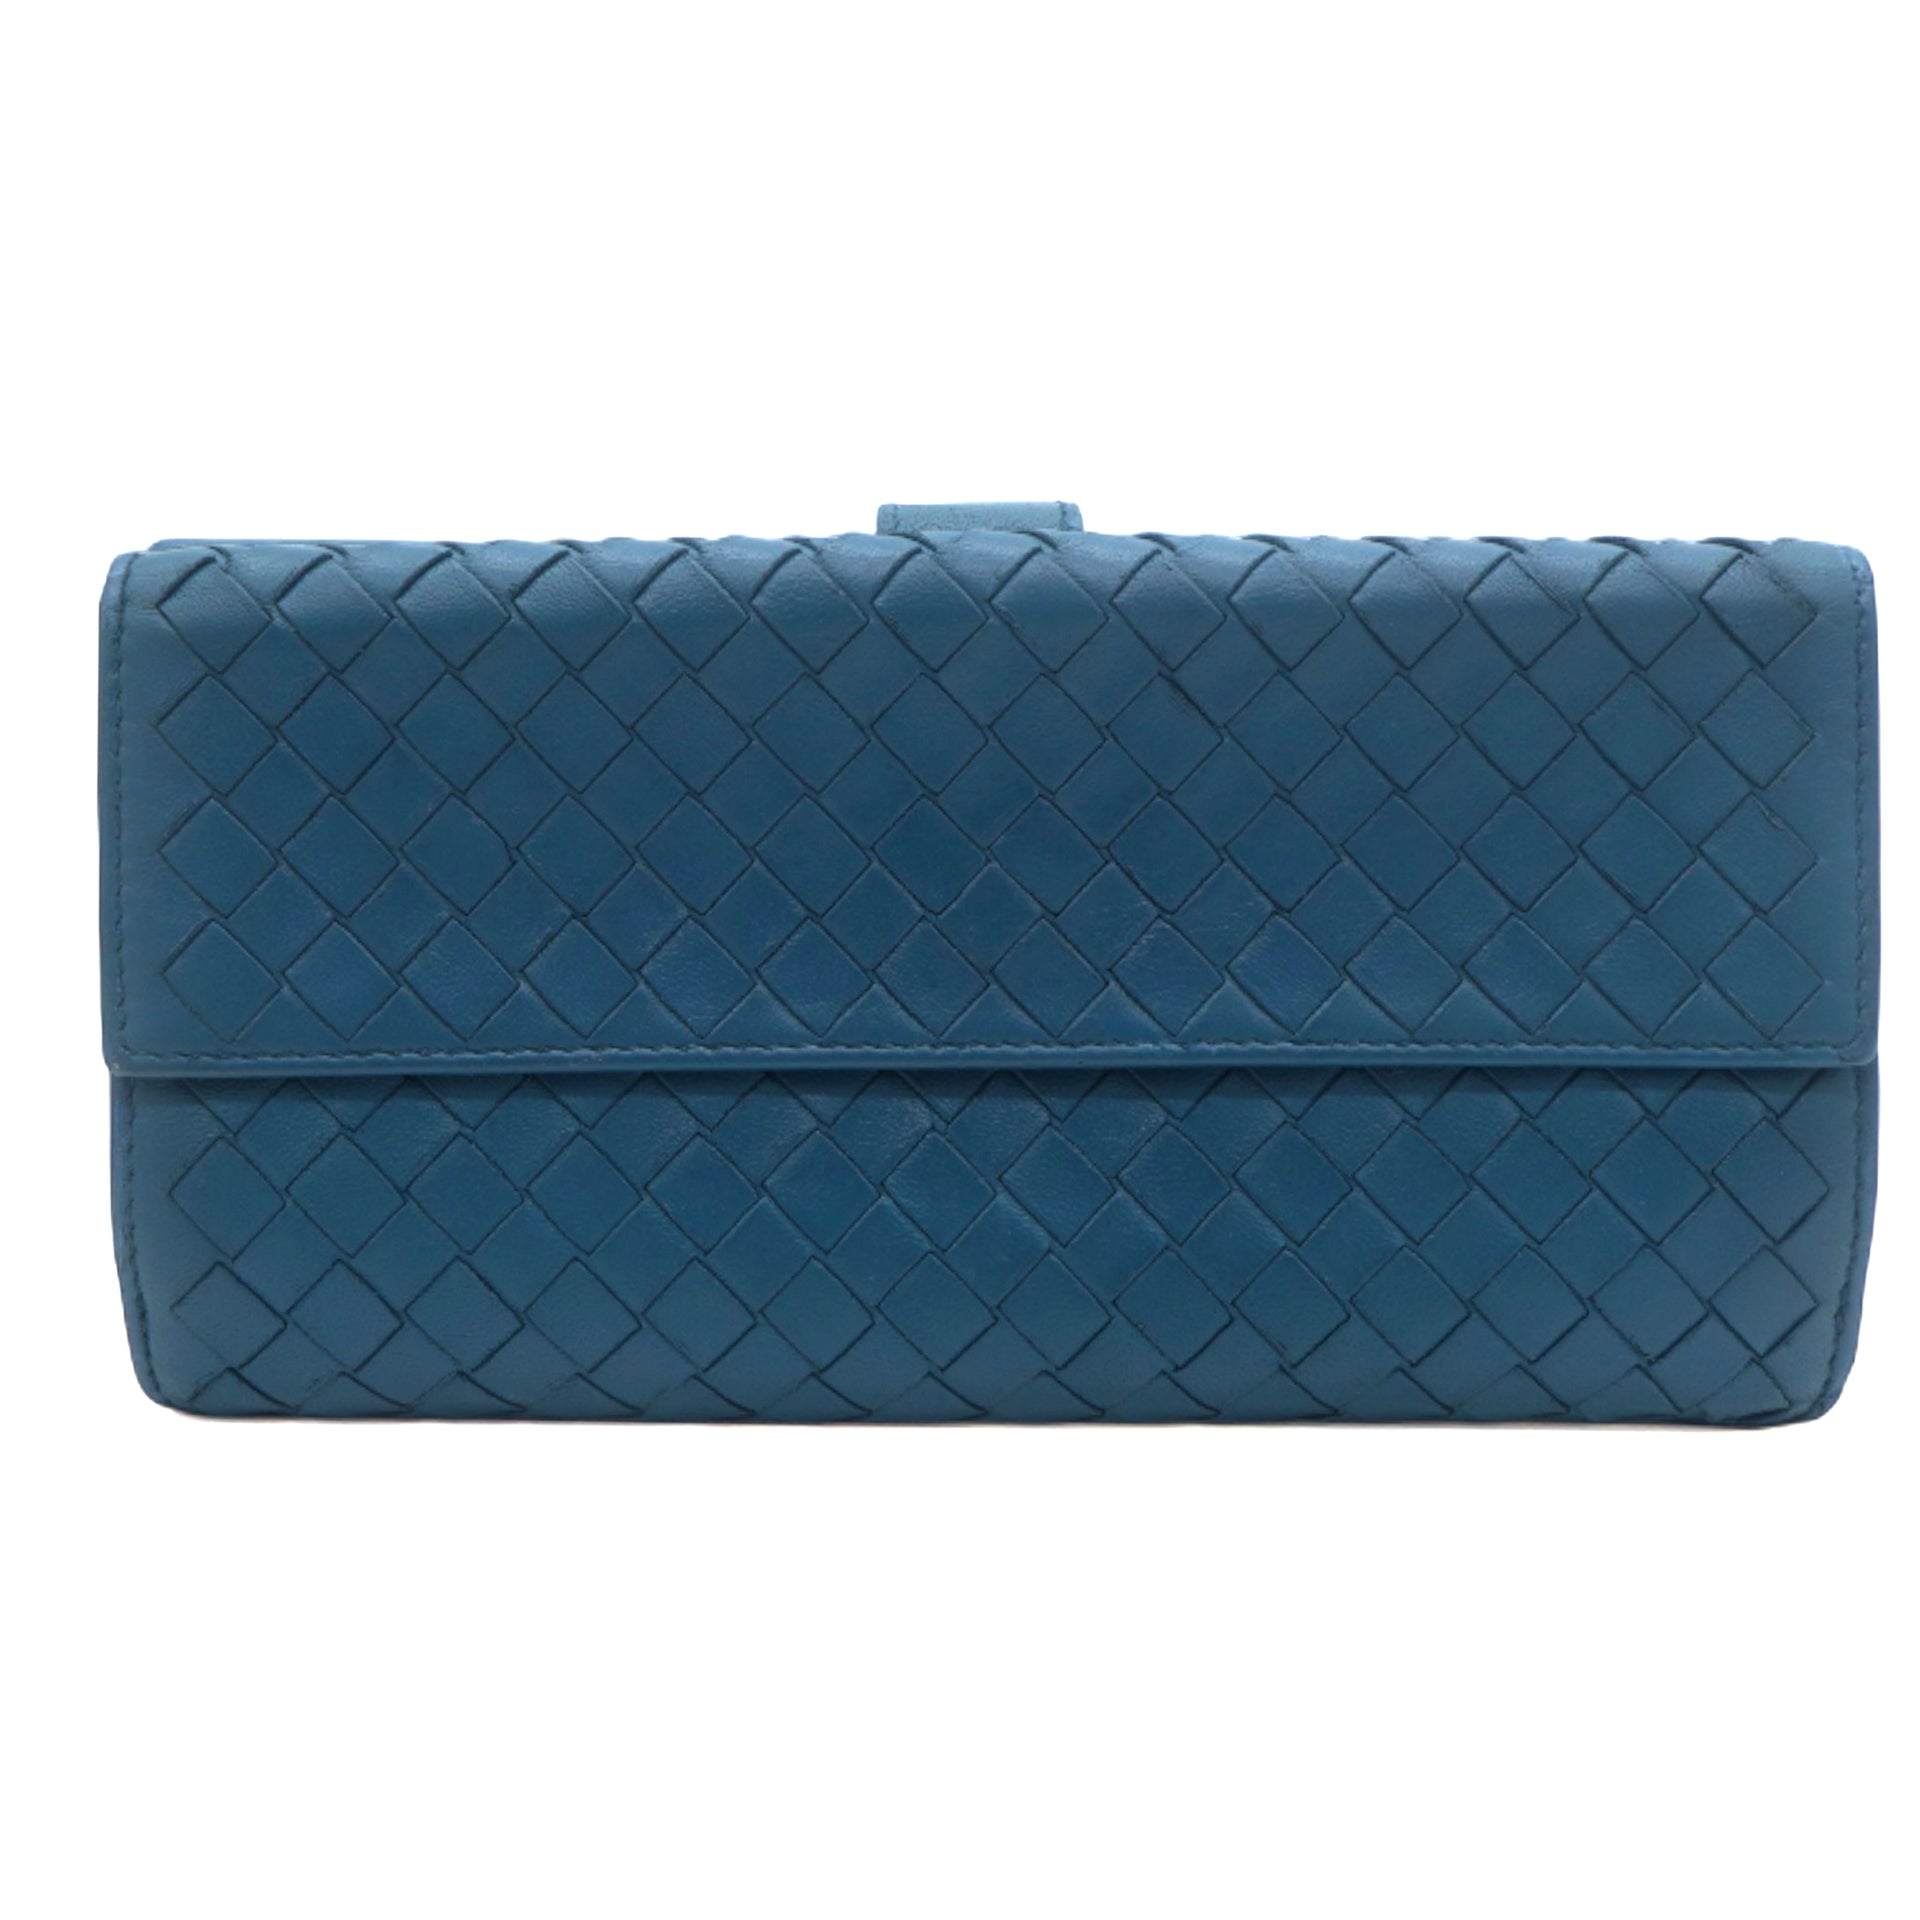 Intrecciato Nappa Leather French Long Wallet Blue